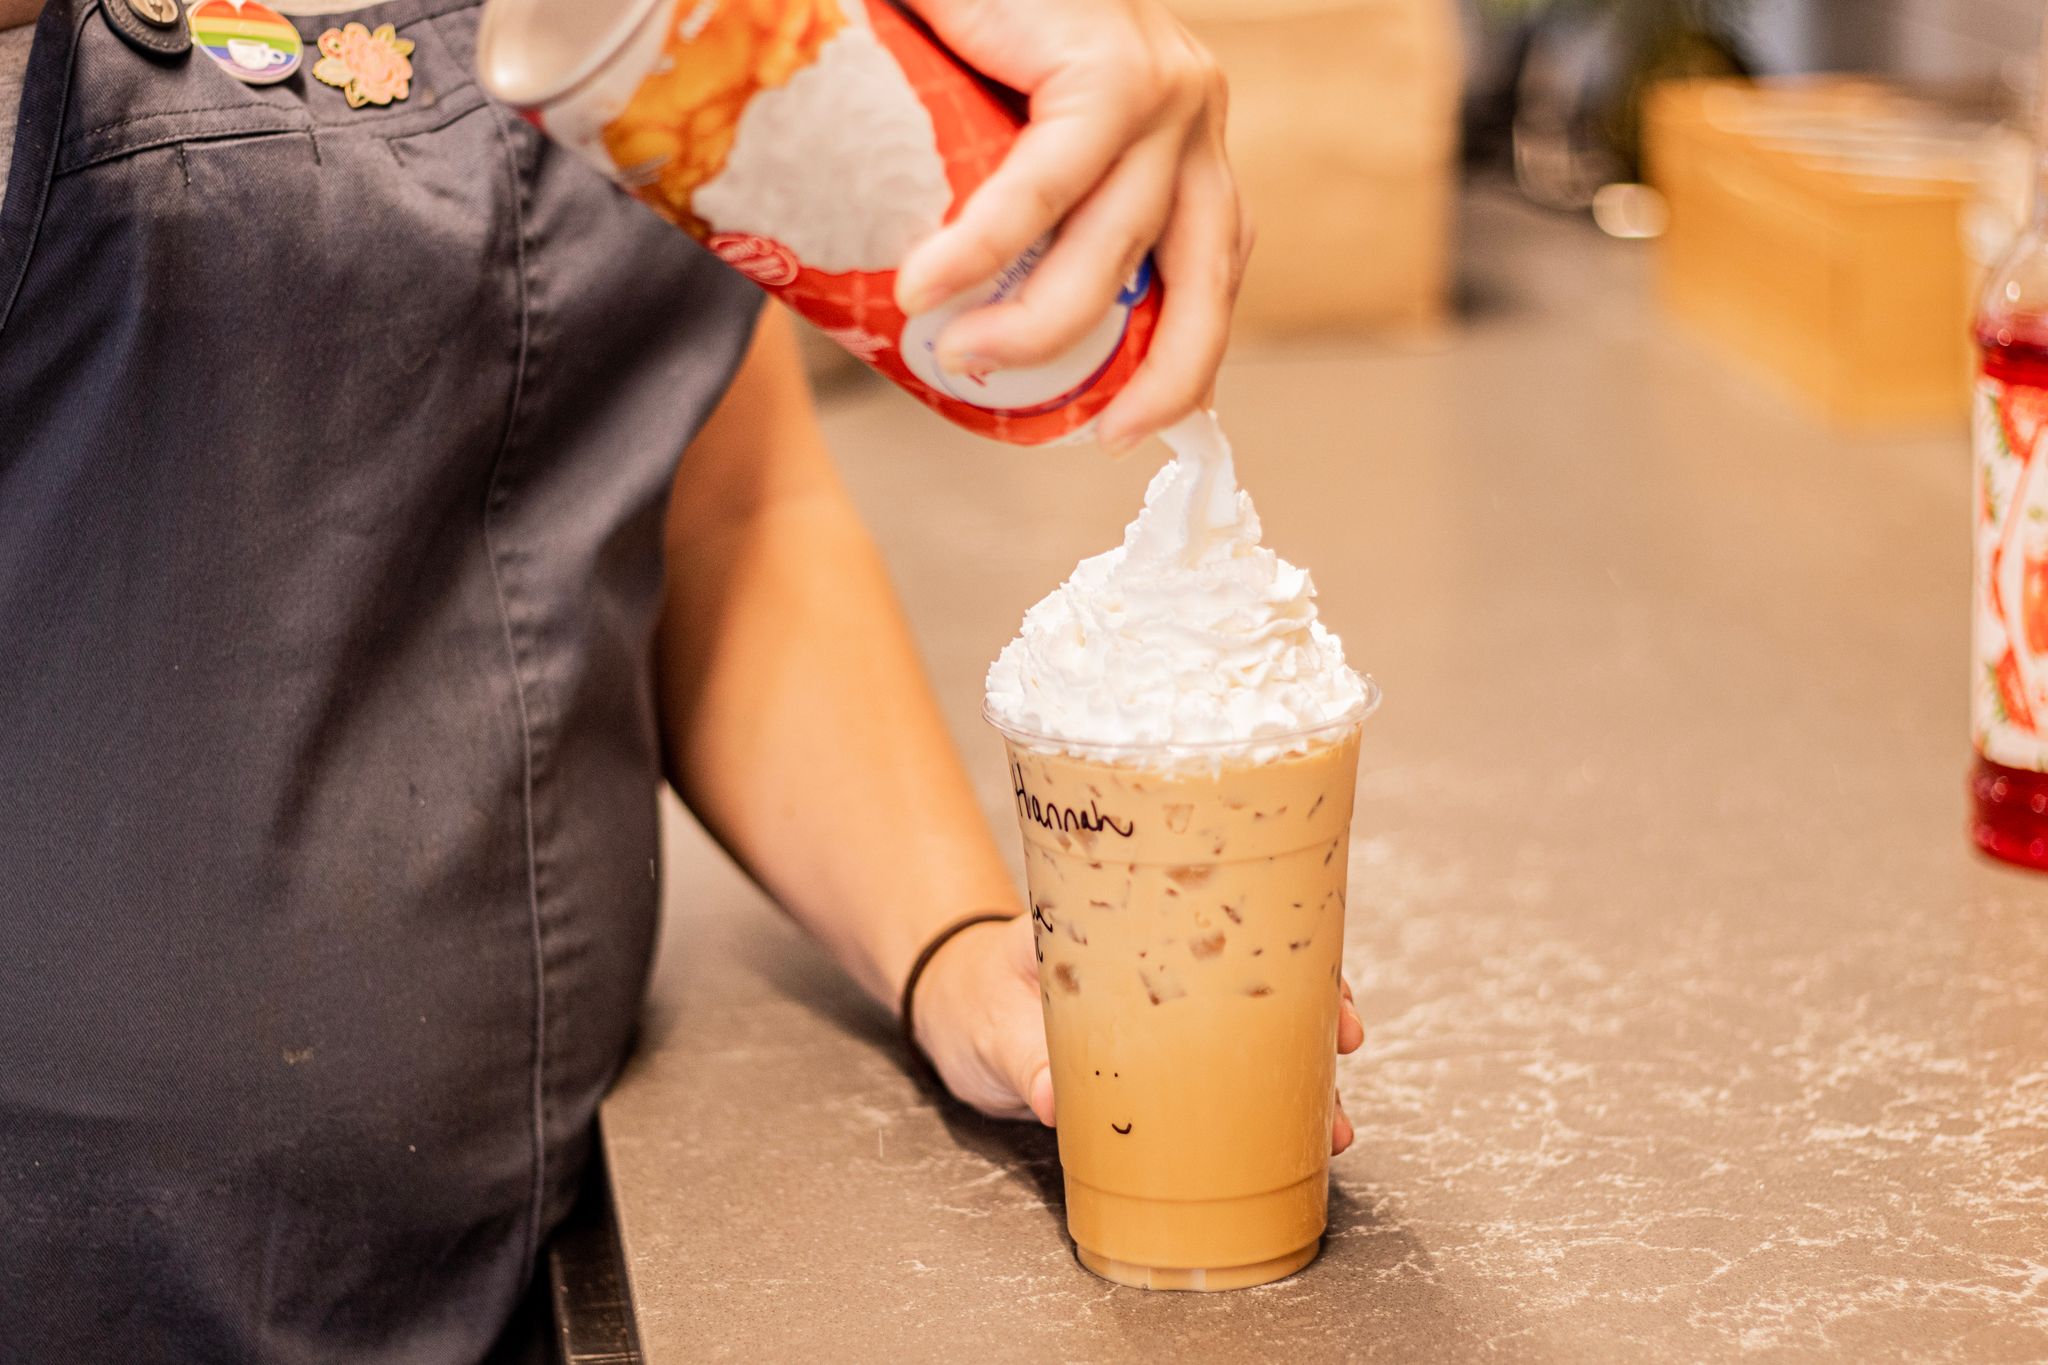 A barista at Lil's Coffee Bar puts whip cream on a coffee.